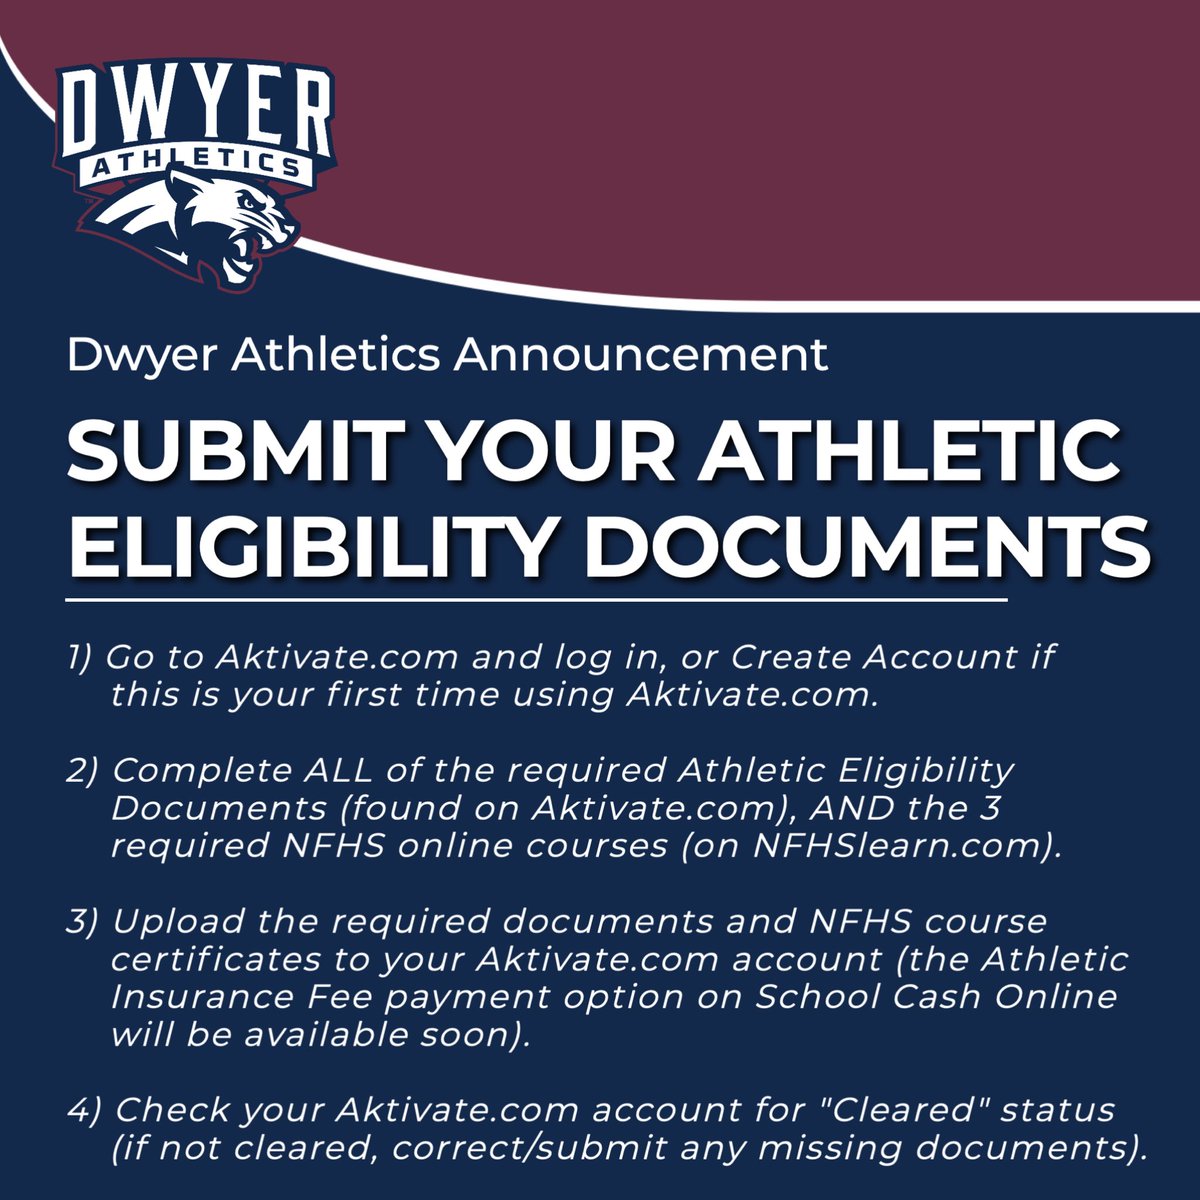 Interested in playing a sport at Dwyer? Get a head start on being cleared for participation by uploading the required Athletic Eligibility docs to your Aktivate.com account now. Additional info & Aktivate help is available on our Athletics webpage (link in bio).